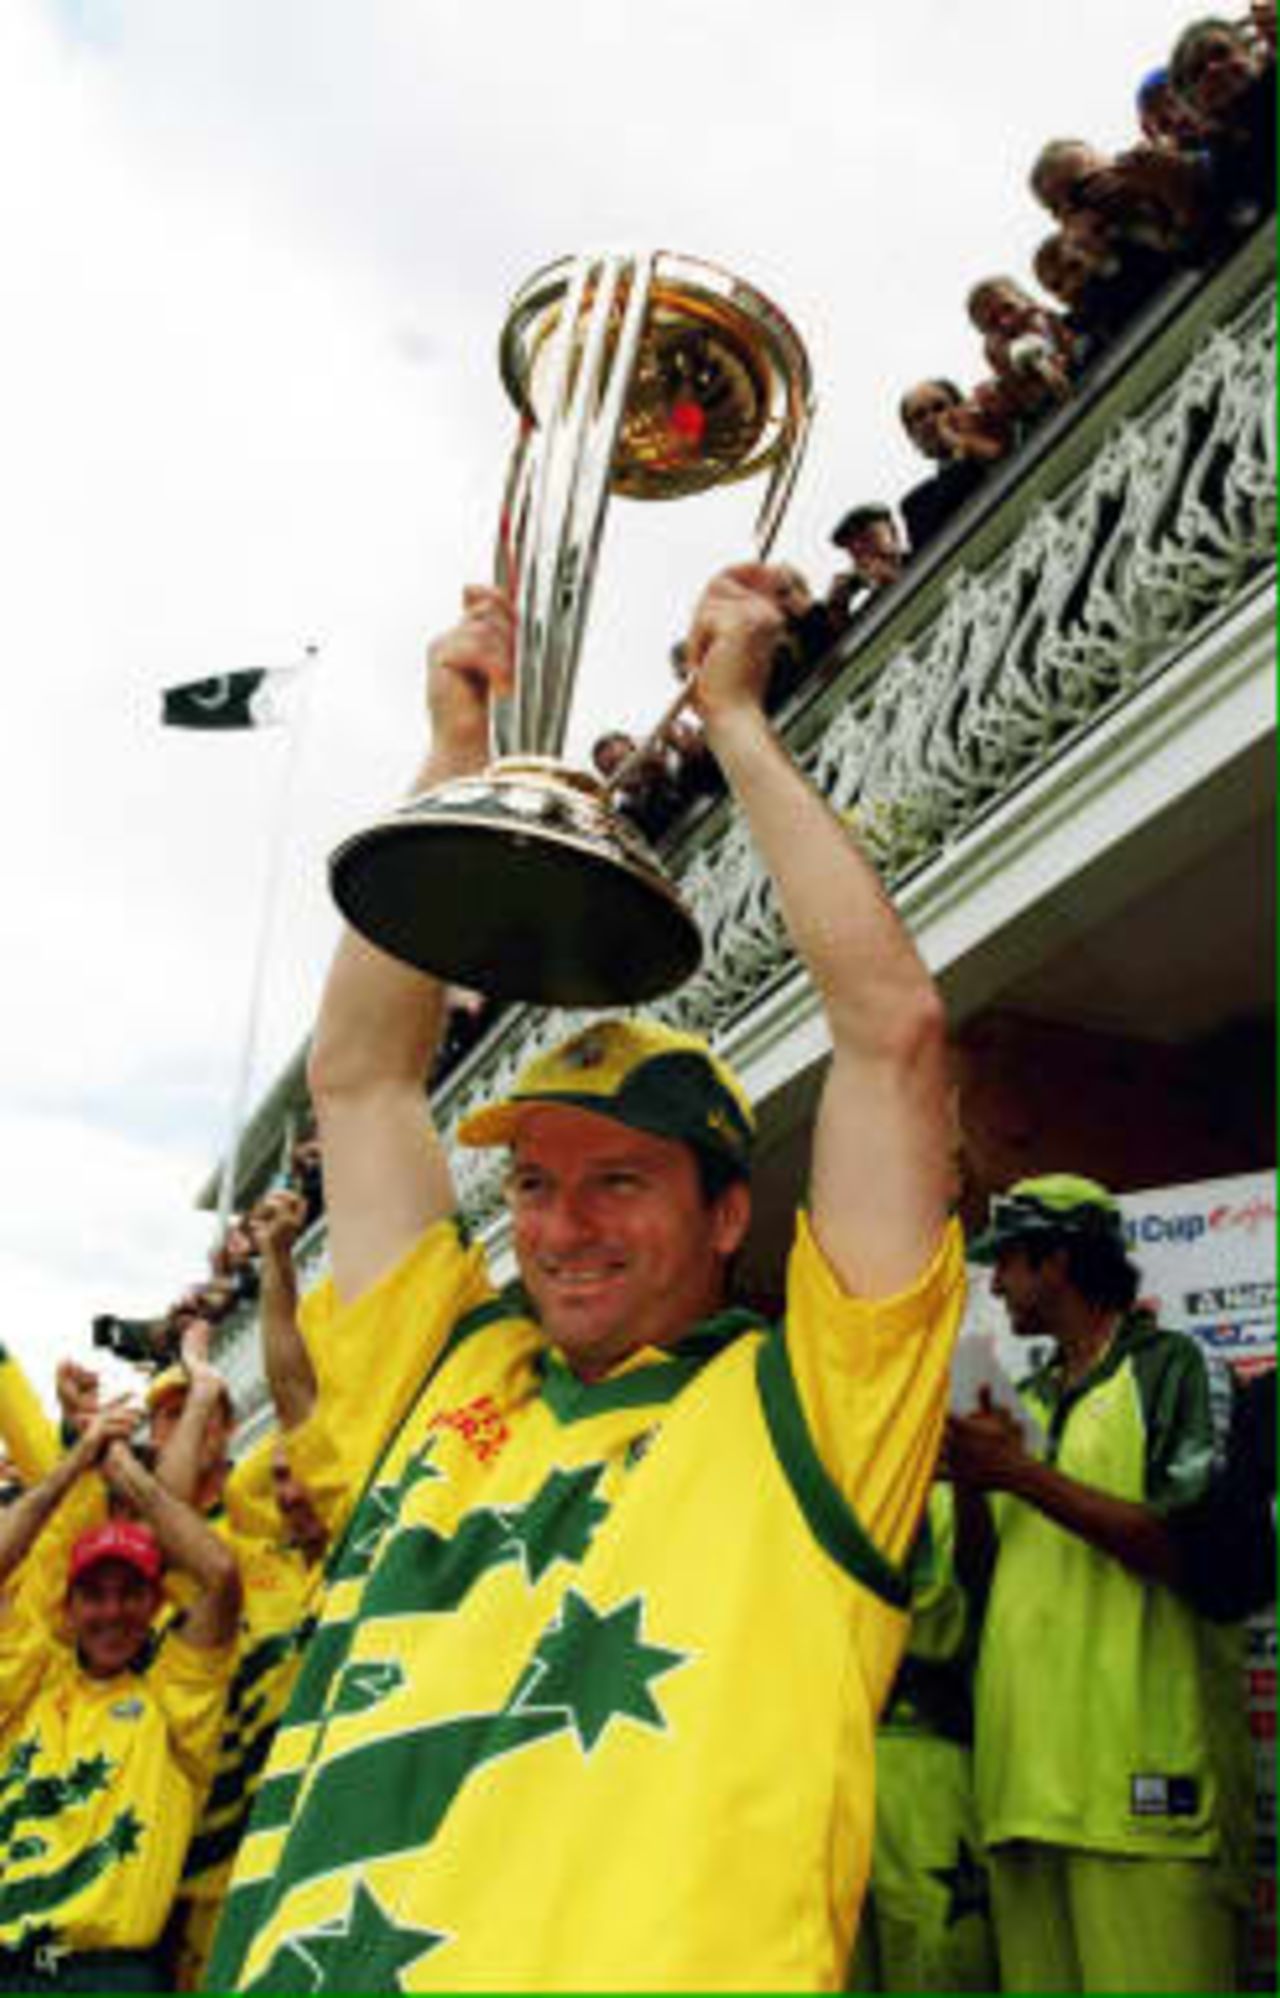 Victorious Australian cricket captain Steve Waugh lifts the Cricket World Cup trophy after Australia defeated Pakistan by eight wickets in the final at Lords, 20 June 1999.